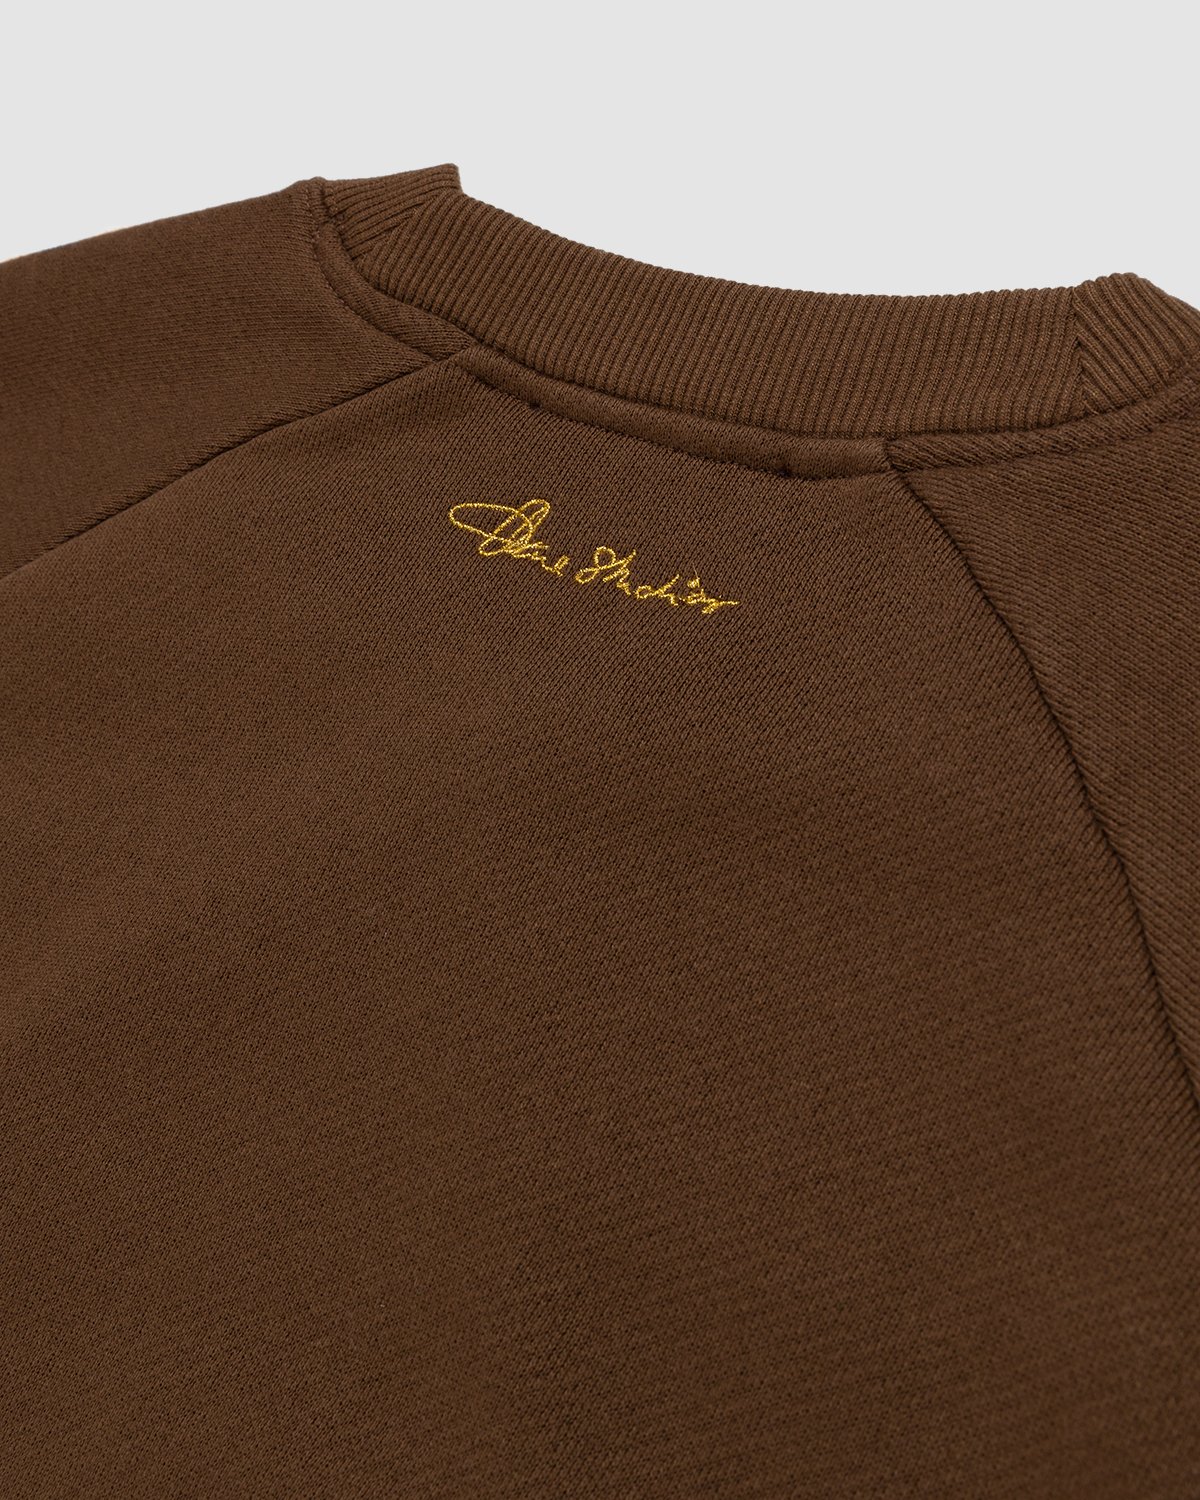 Acne Studios - Sweater Brown - Clothing - Brown - Image 5